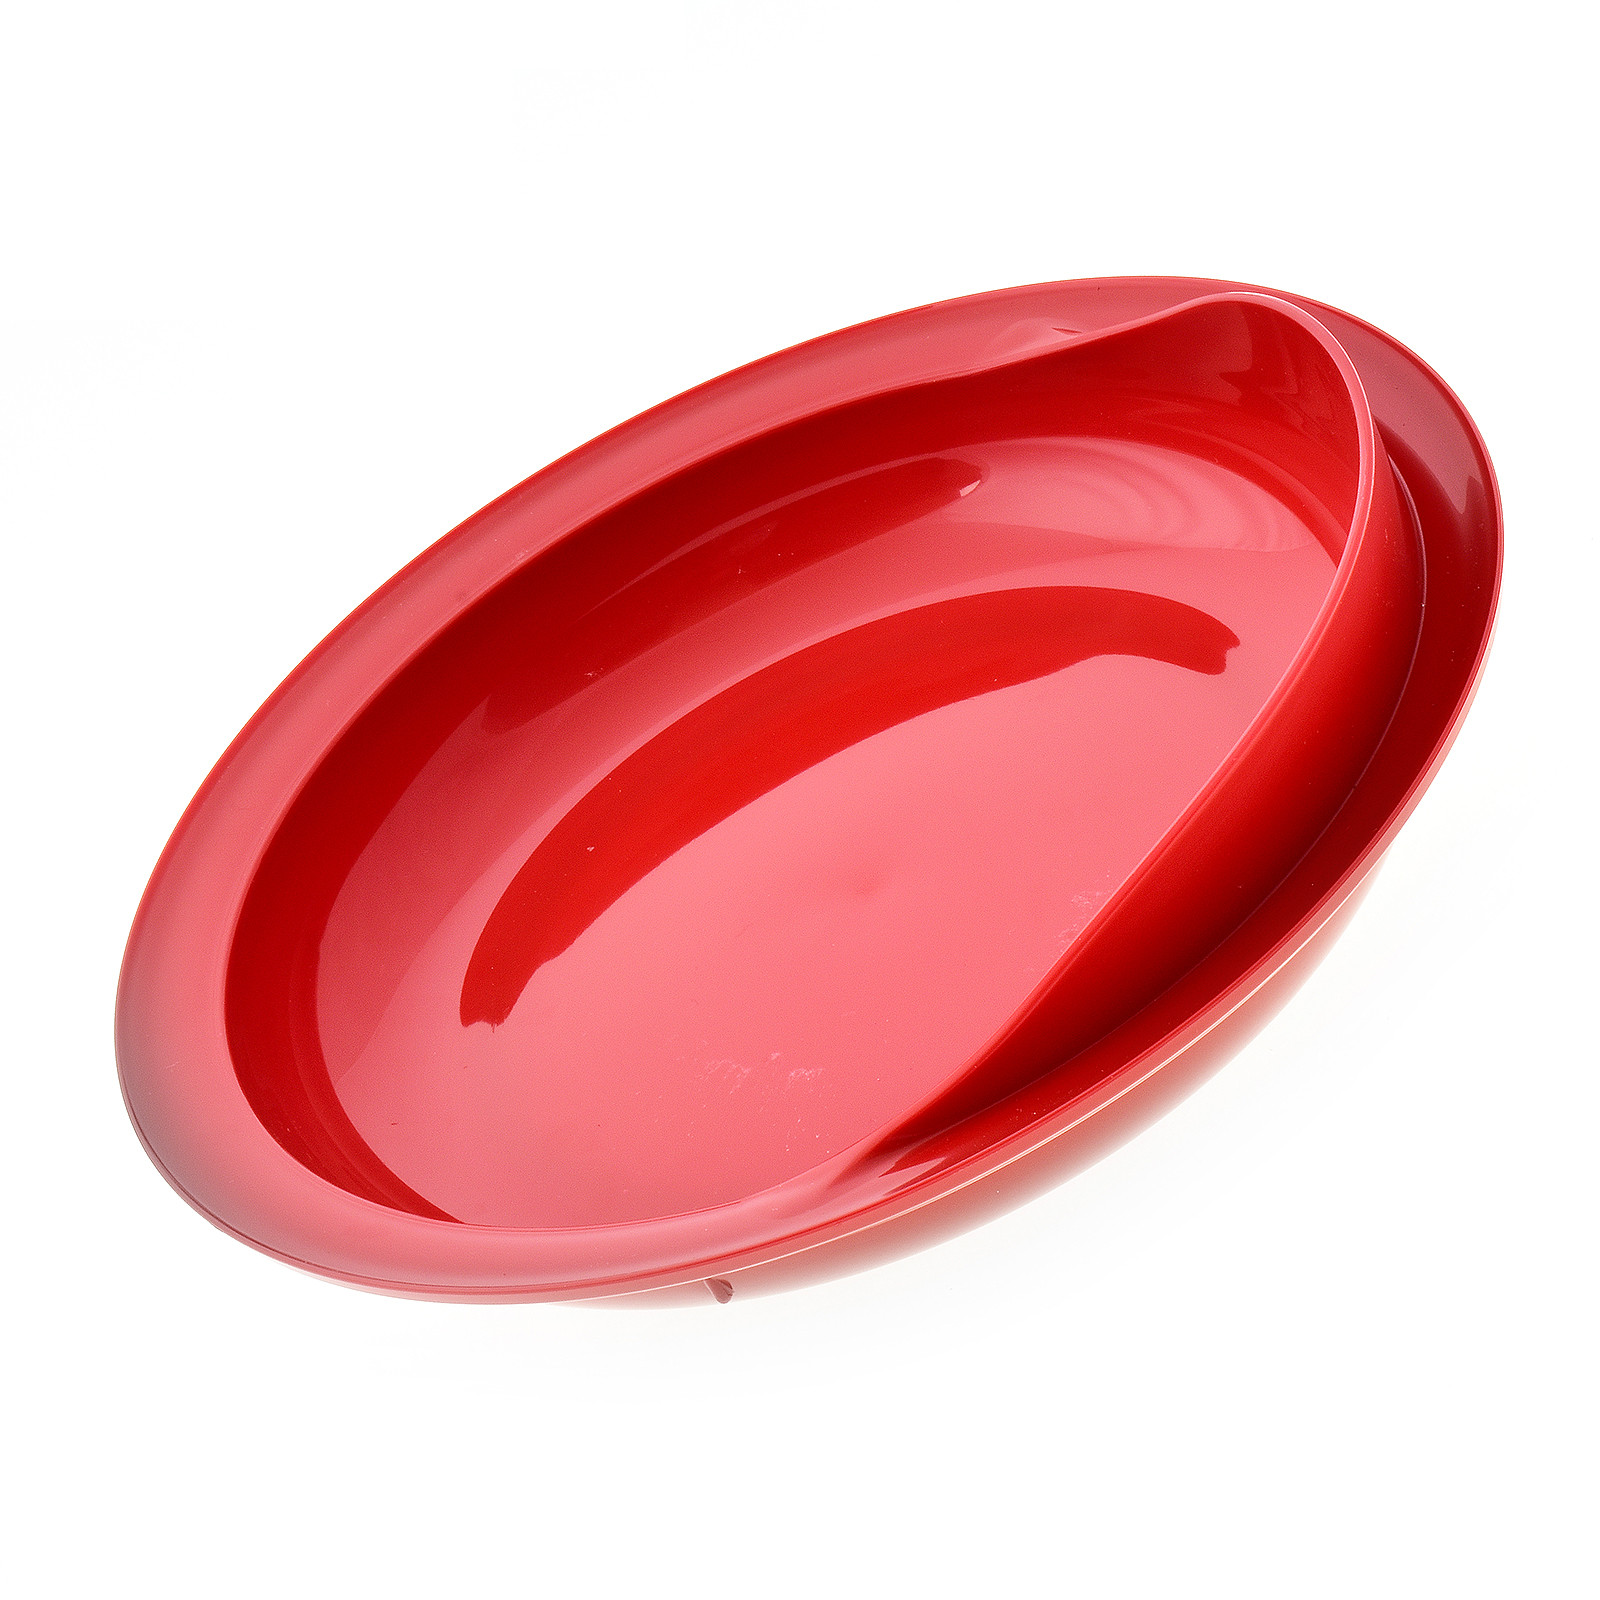 Providence Spillproof Scoop Dish